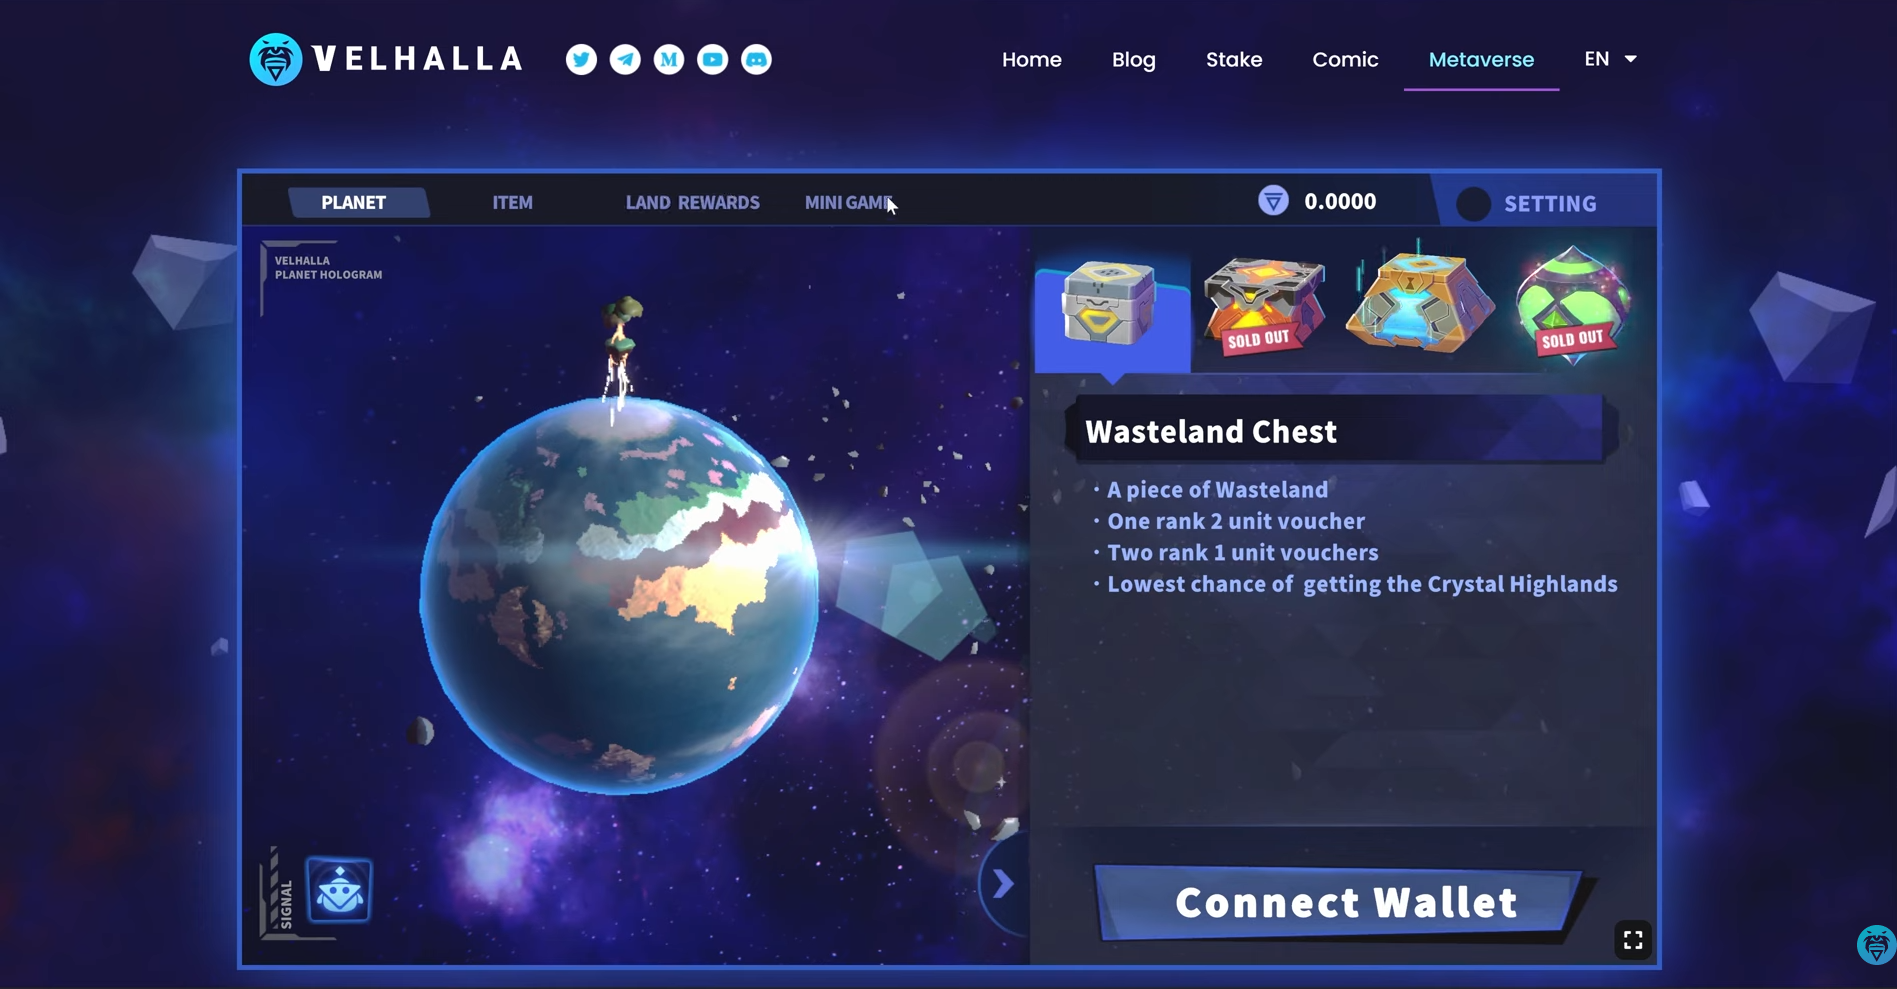 game image from Velhalla